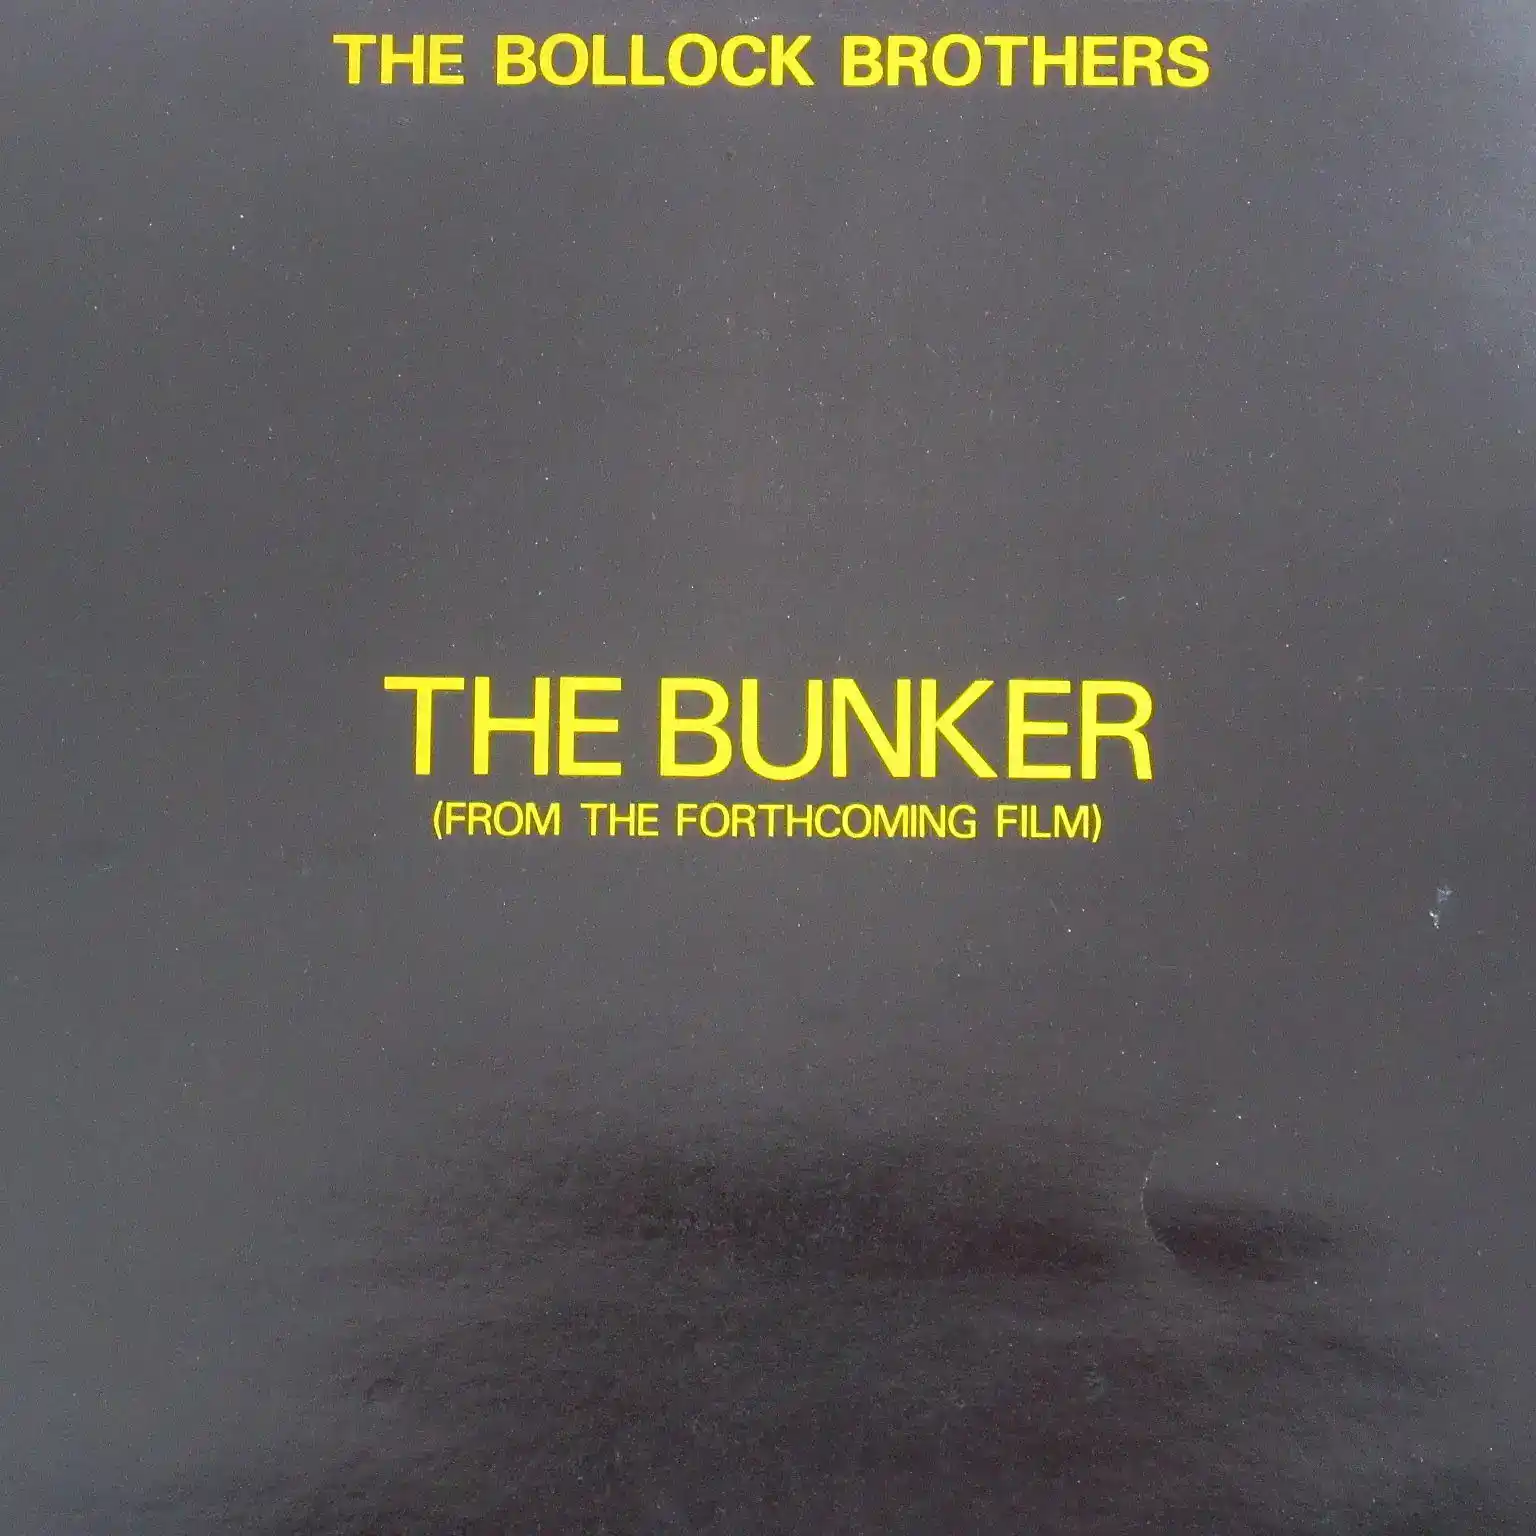 BOLLOCK BROTHERS / BUNKER (FROM THE FORTHCOMING FILM)